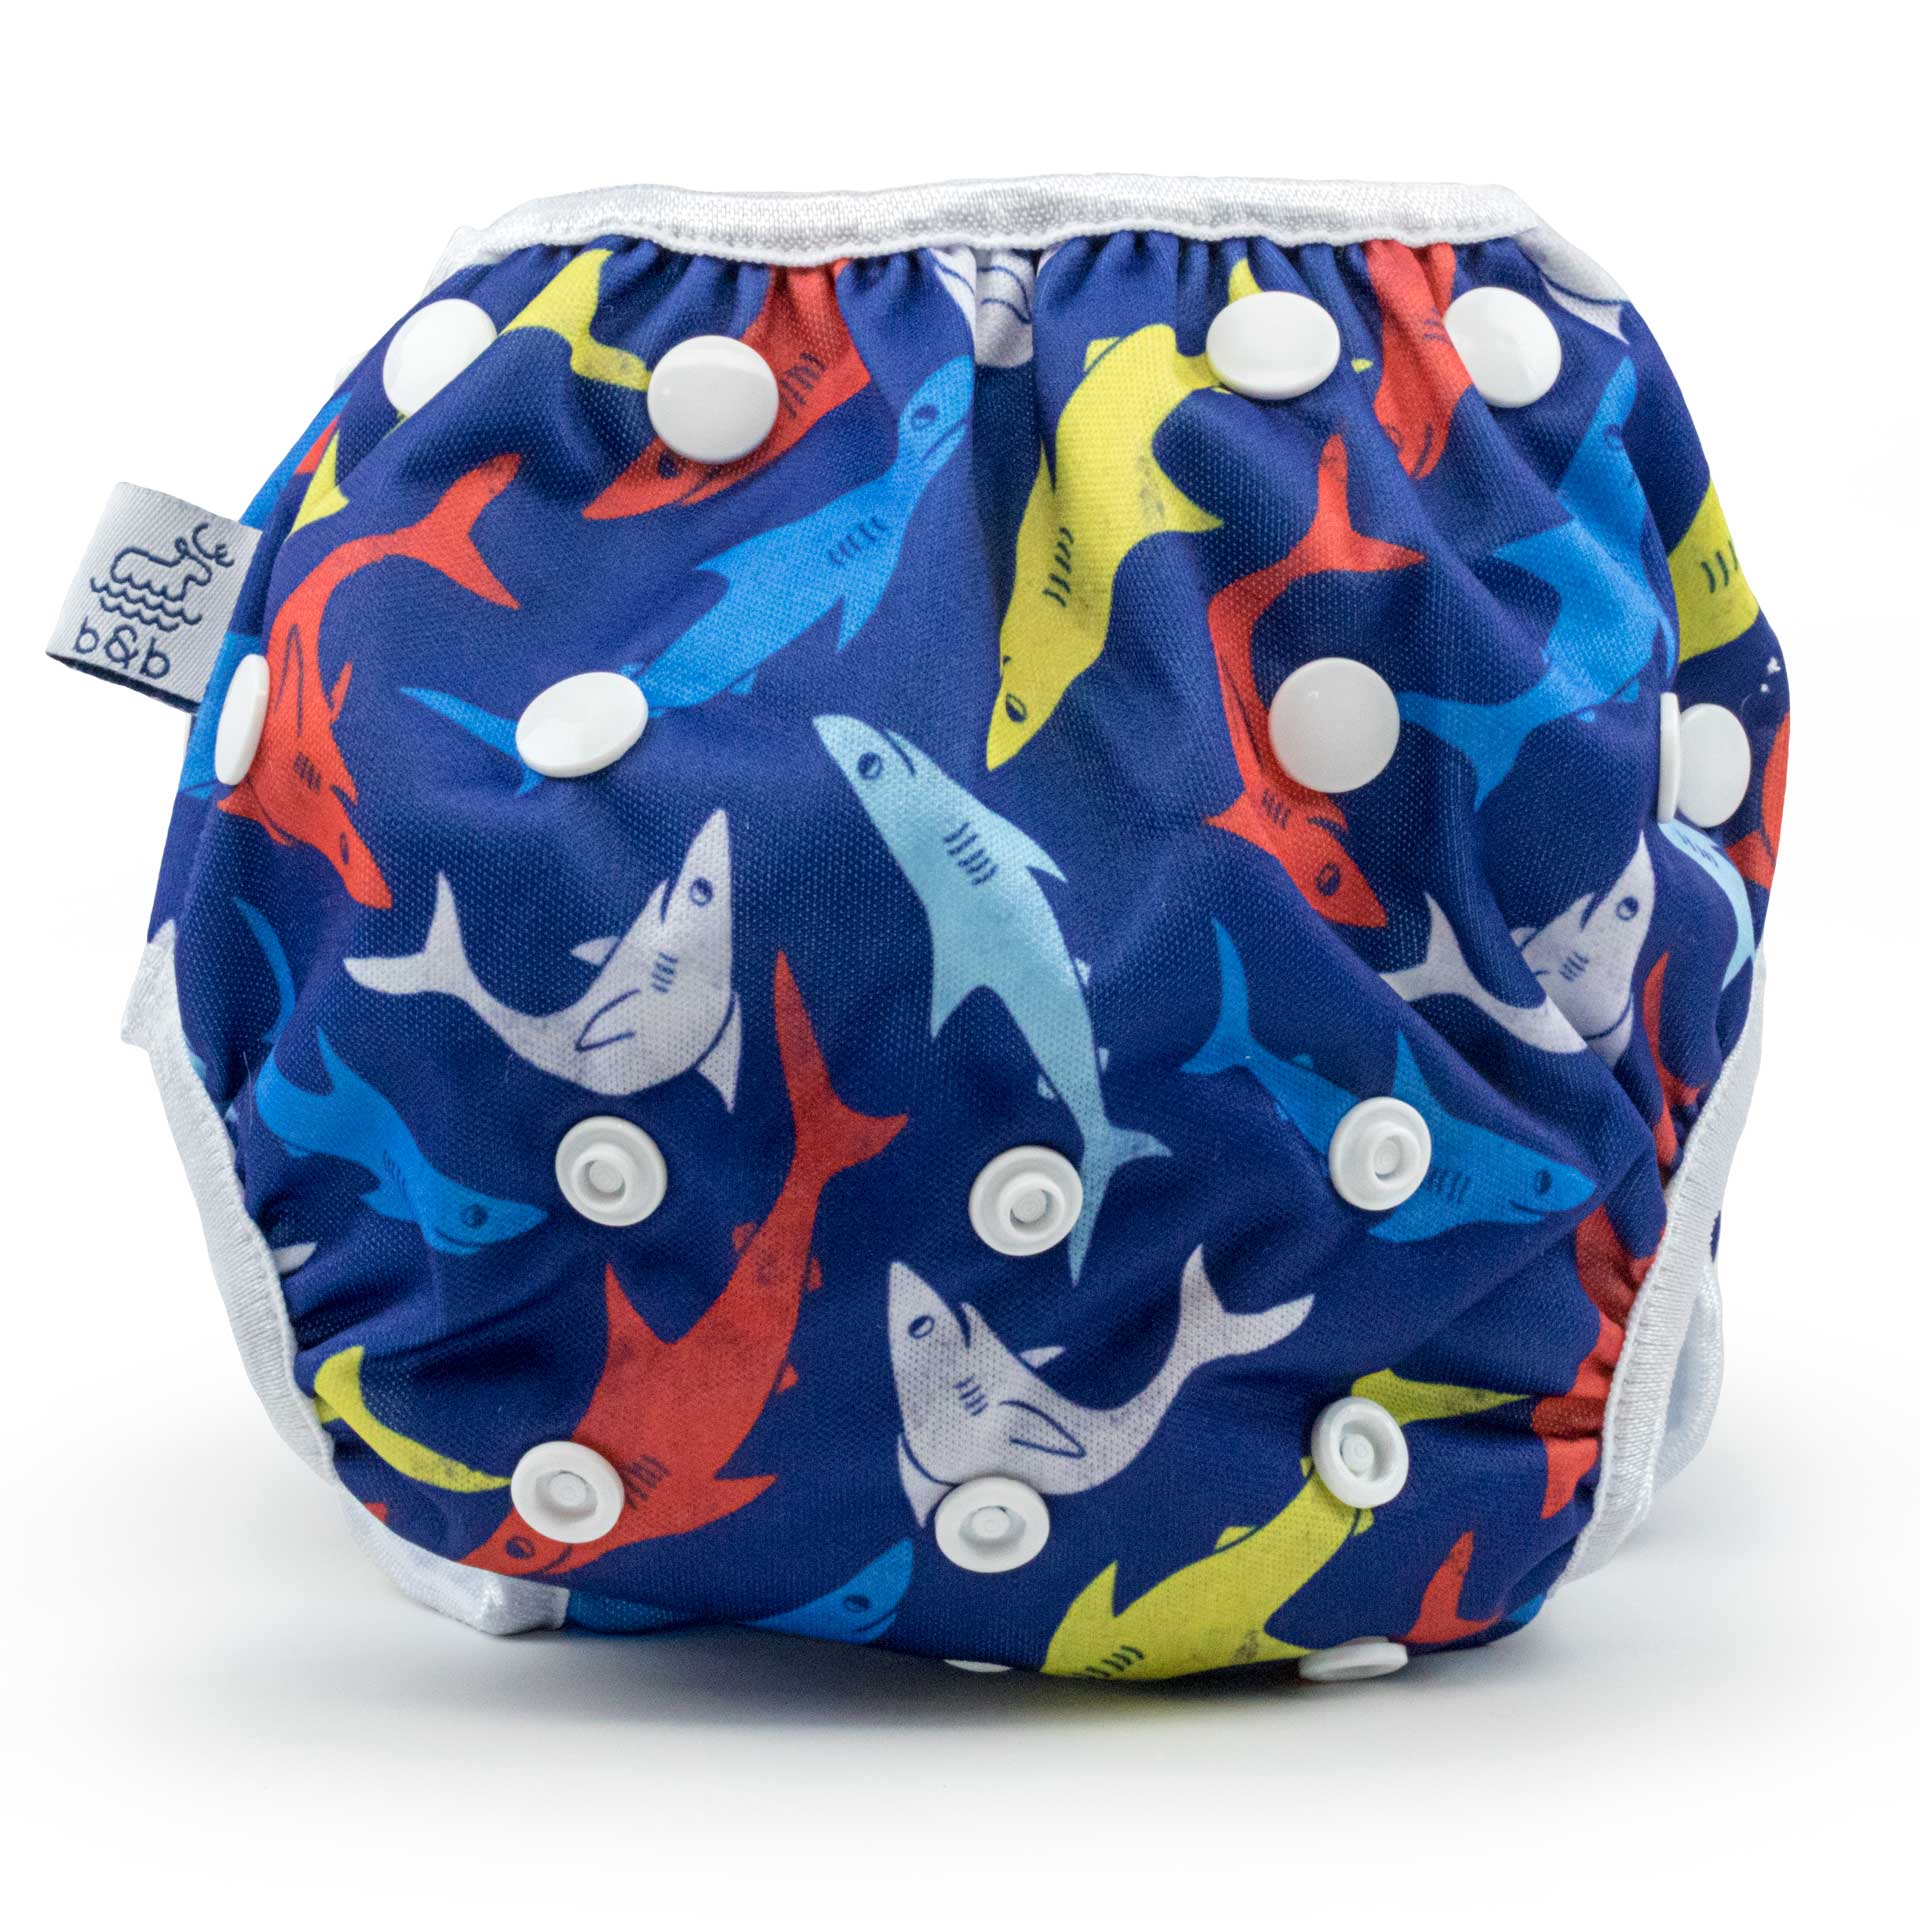 Beau and Belle Littles Swim Diaper, Regular Size, dark blue with sharks, front view